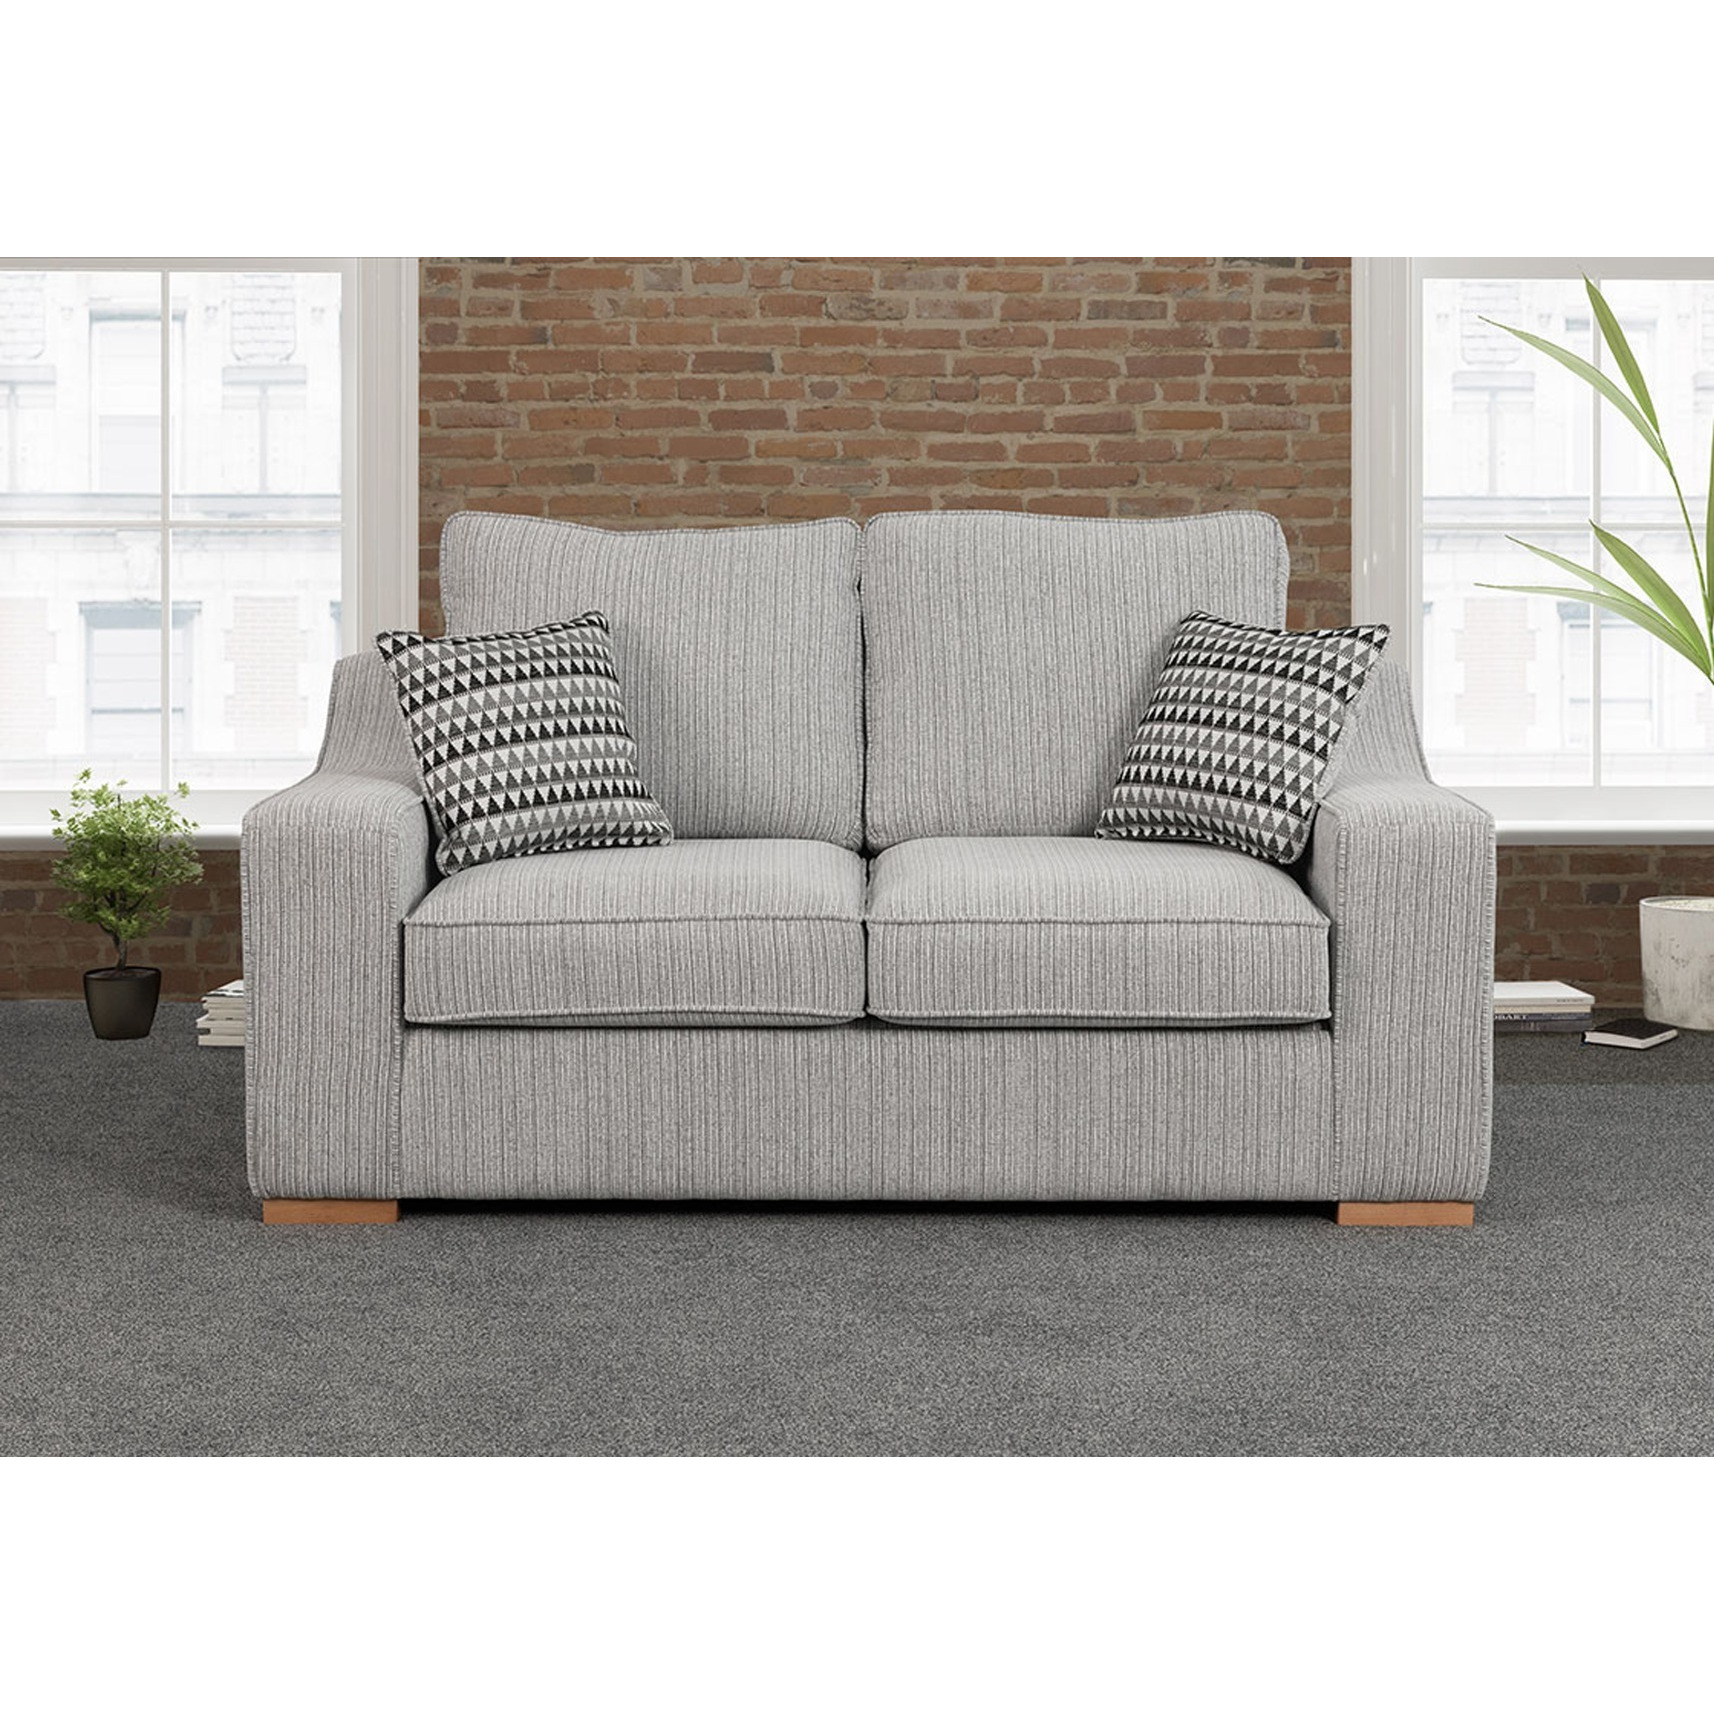 Sweet Dreams Clyde 2 Seater Fabric Sofa Bed - image 1